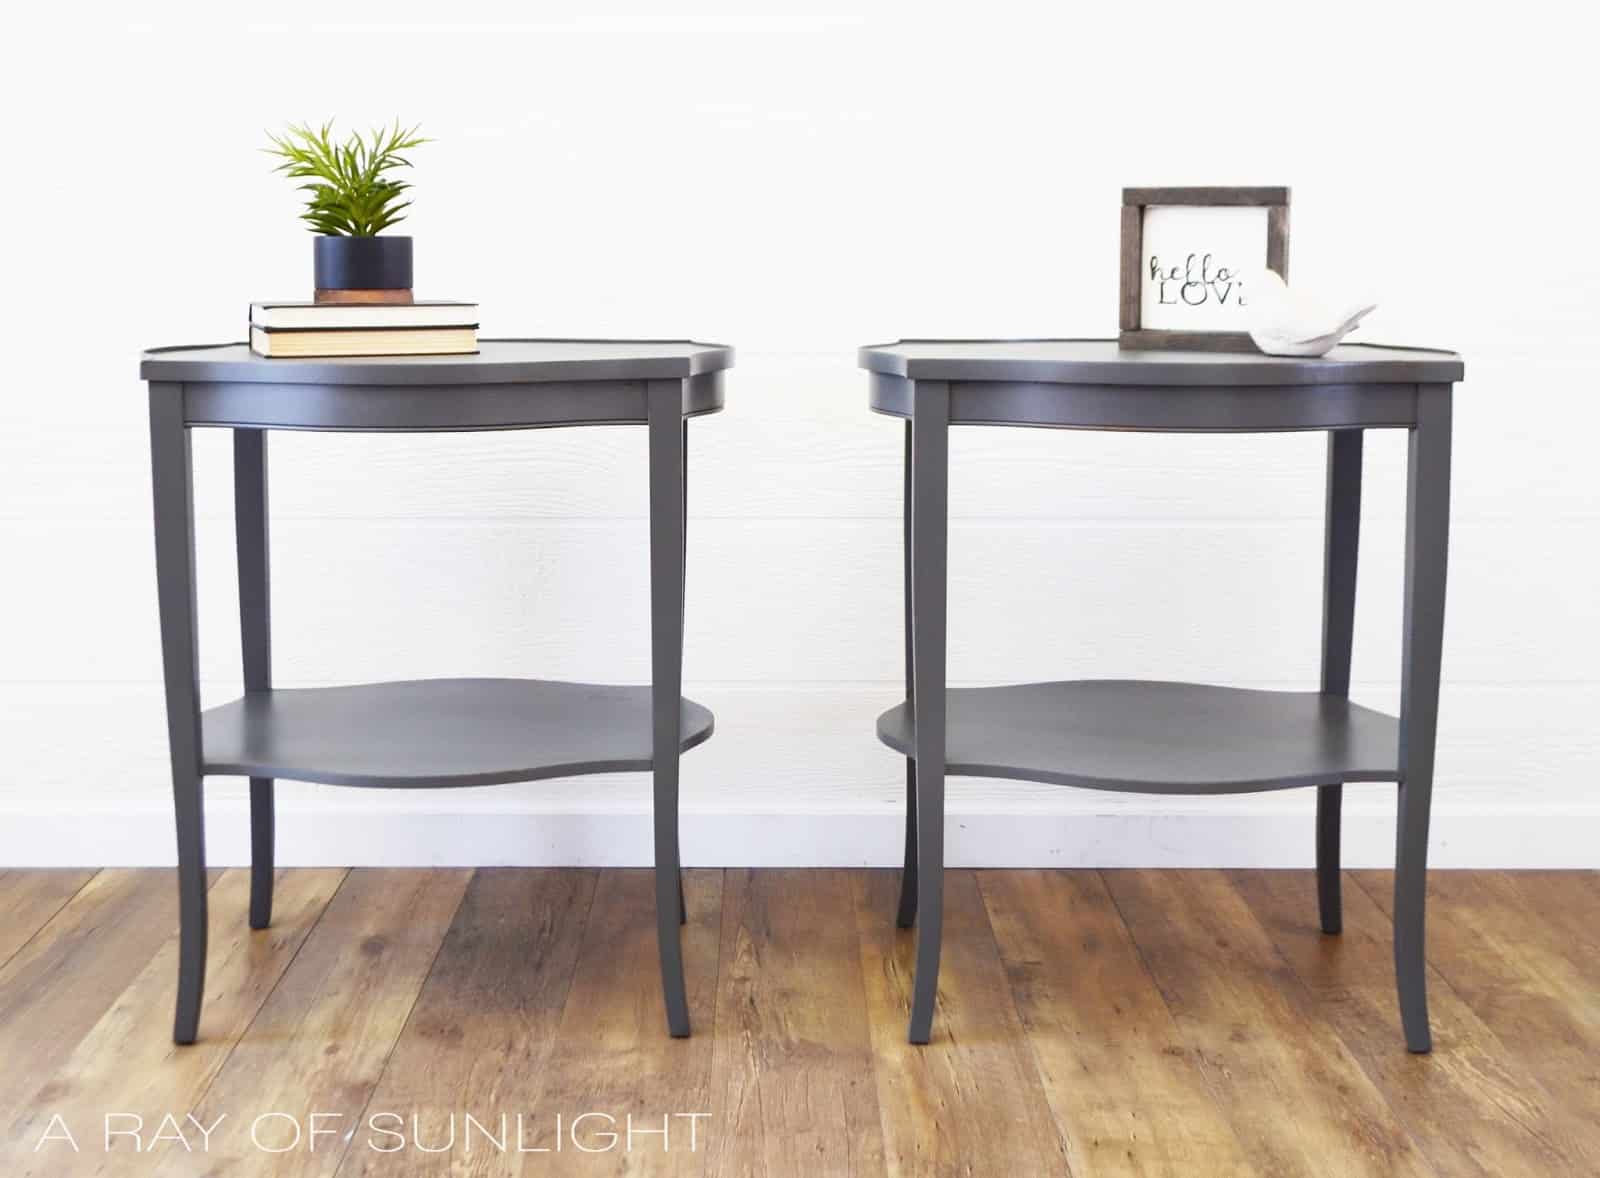 Warm Grey Nightstand Makeover #DIY #furniturepaint #paintedfurniture #homedecor #endtable #charcoal #grey #chalkpaint #countrychicpaint - blog.countrychicpaint.com